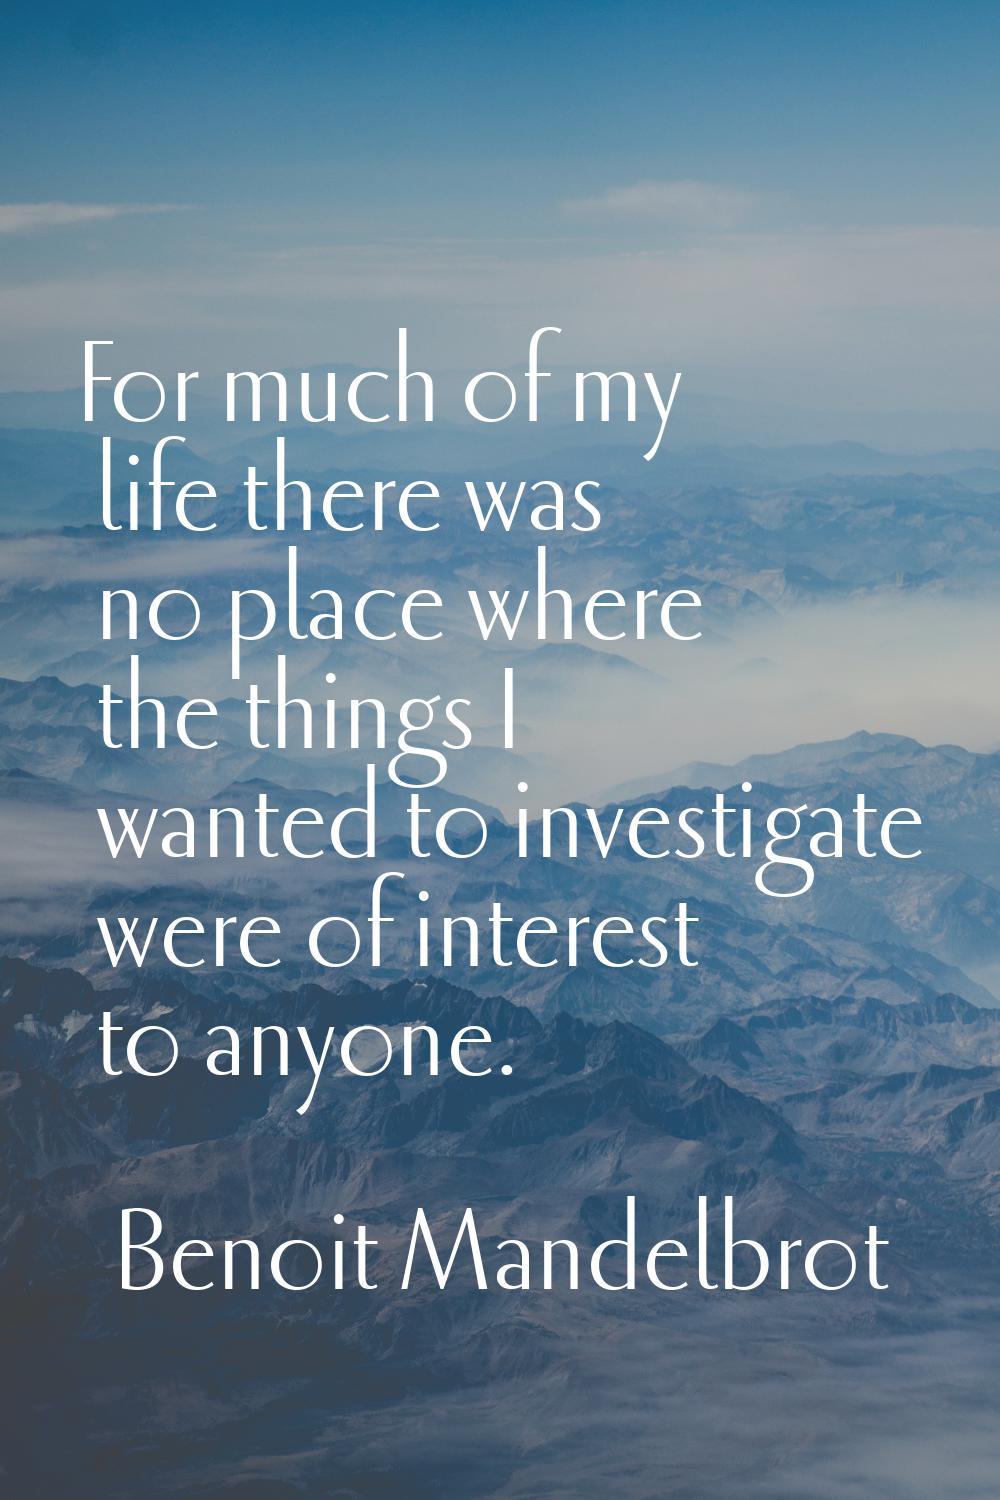 For much of my life there was no place where the things I wanted to investigate were of interest to